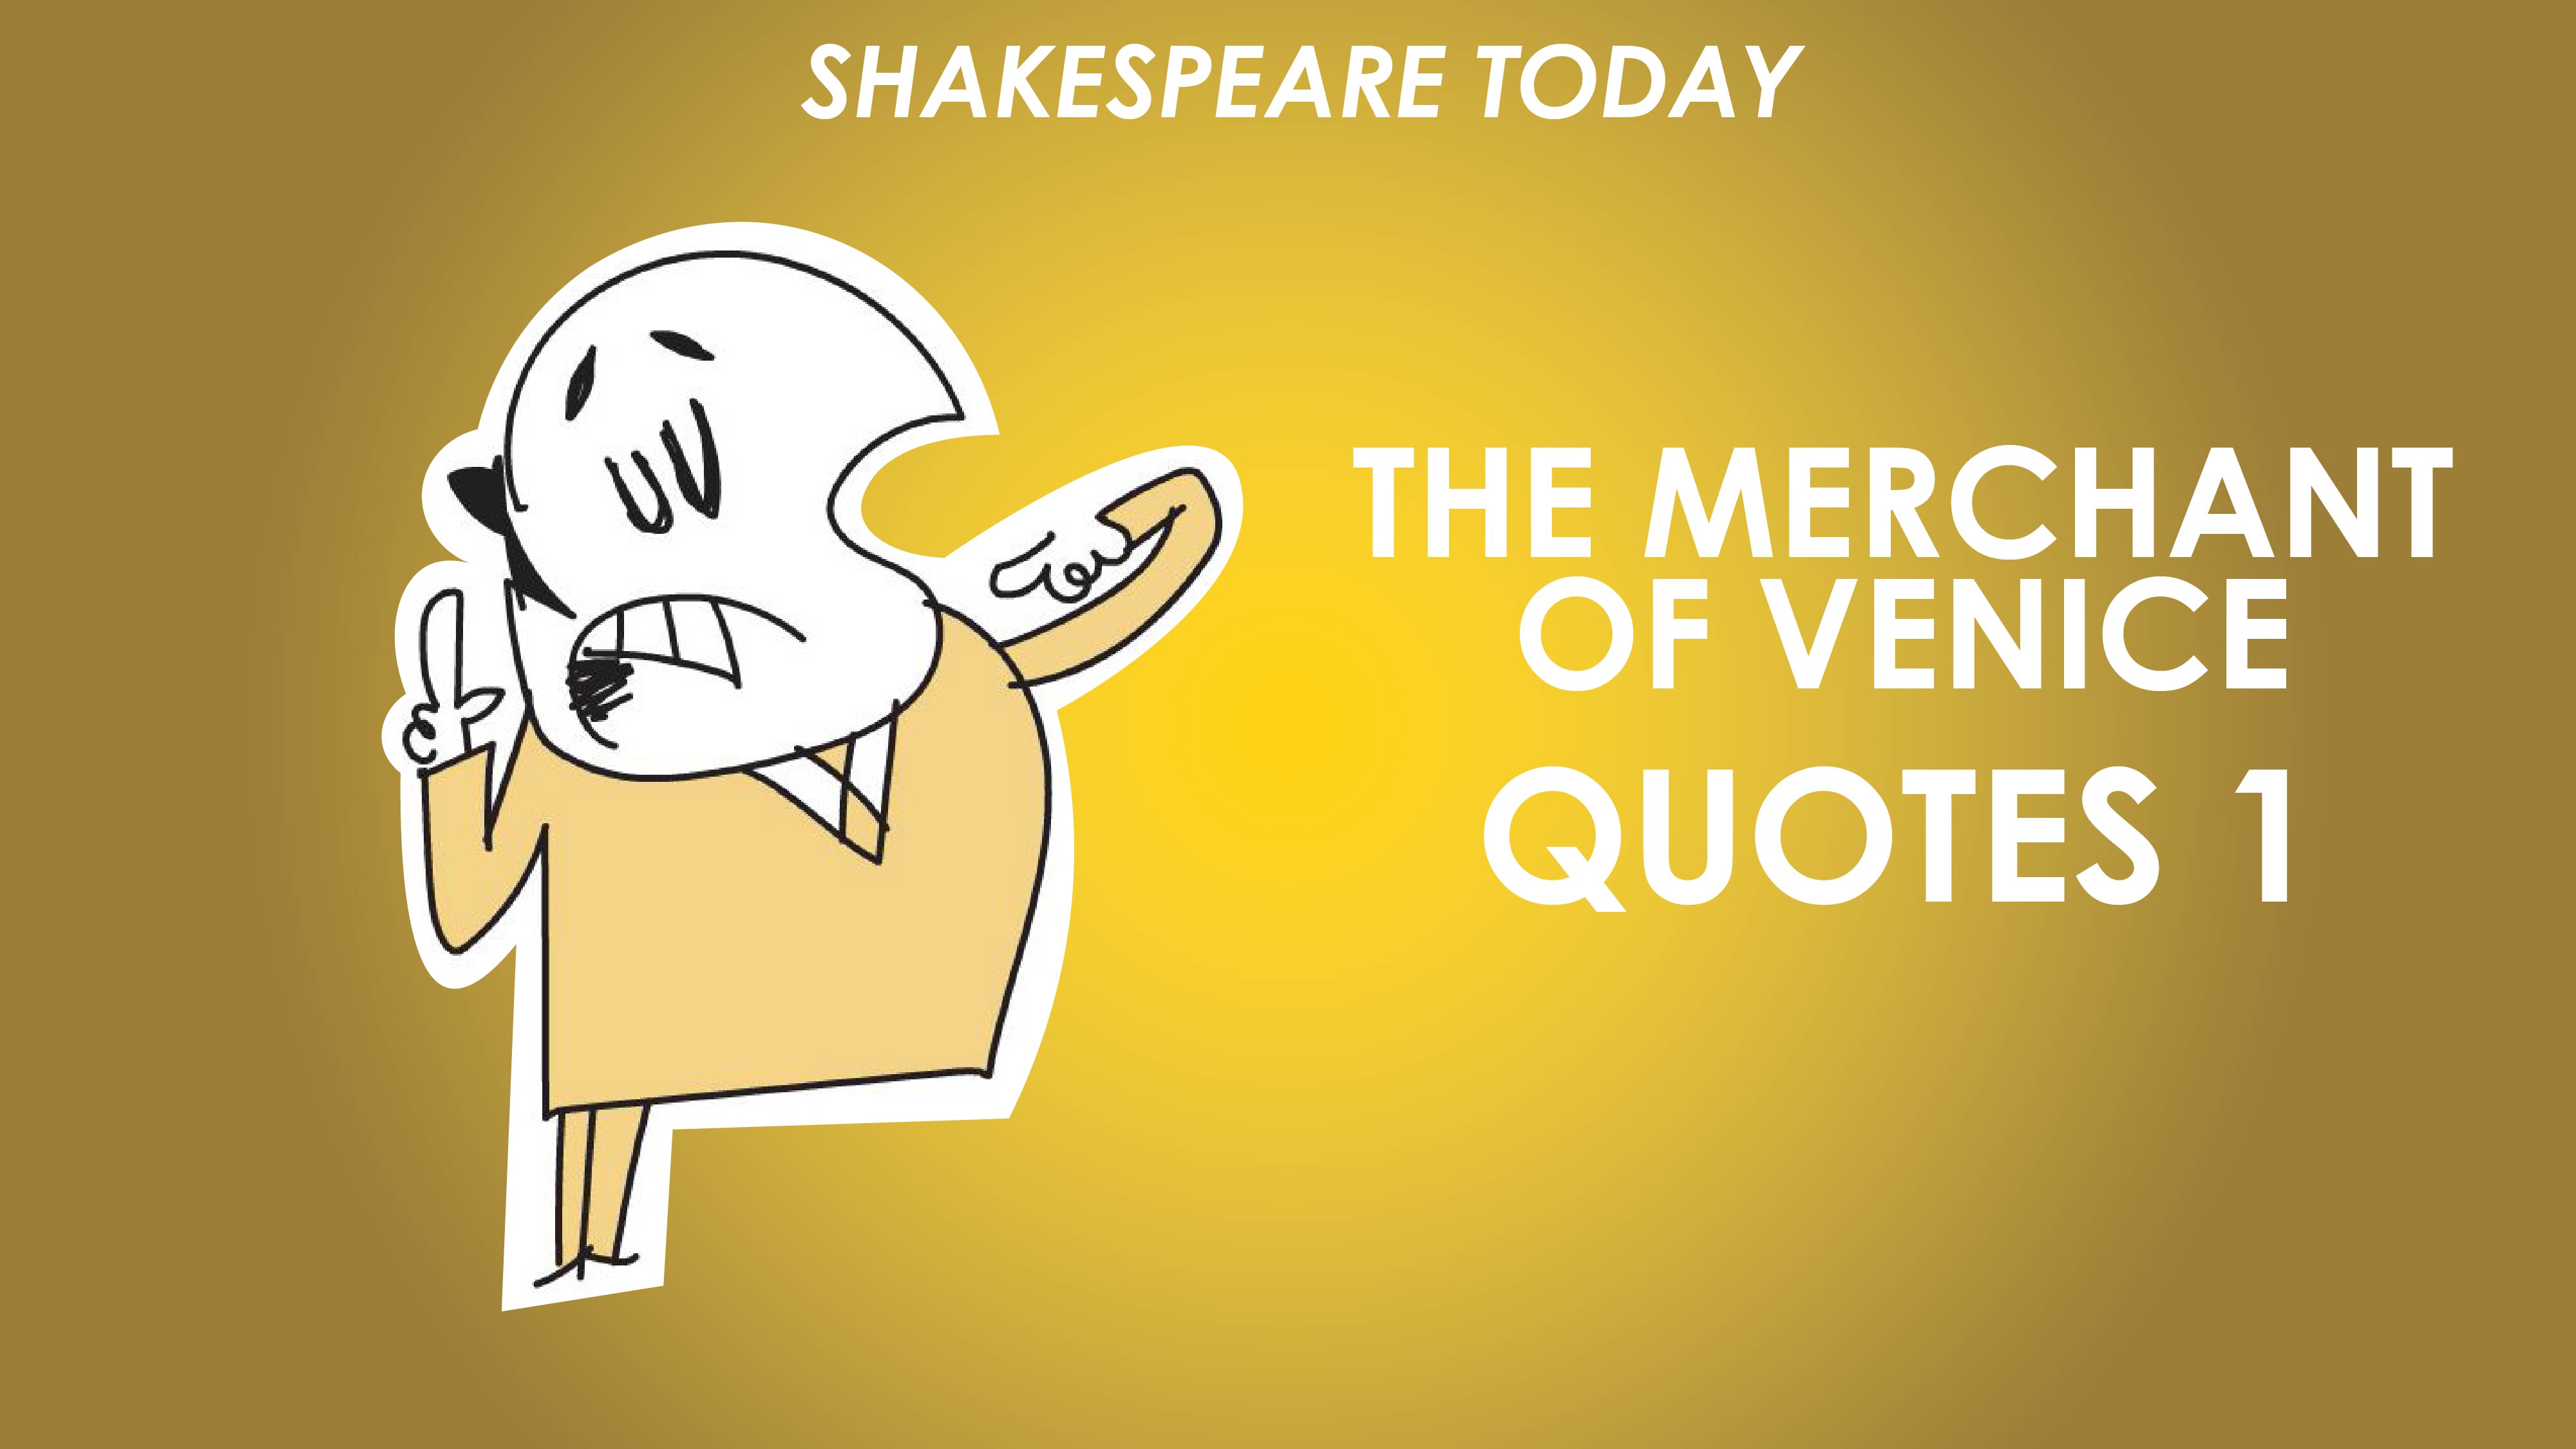 The Merchant of Venice Key Quotes Analysis Part 1 - Shakespeare Today Series